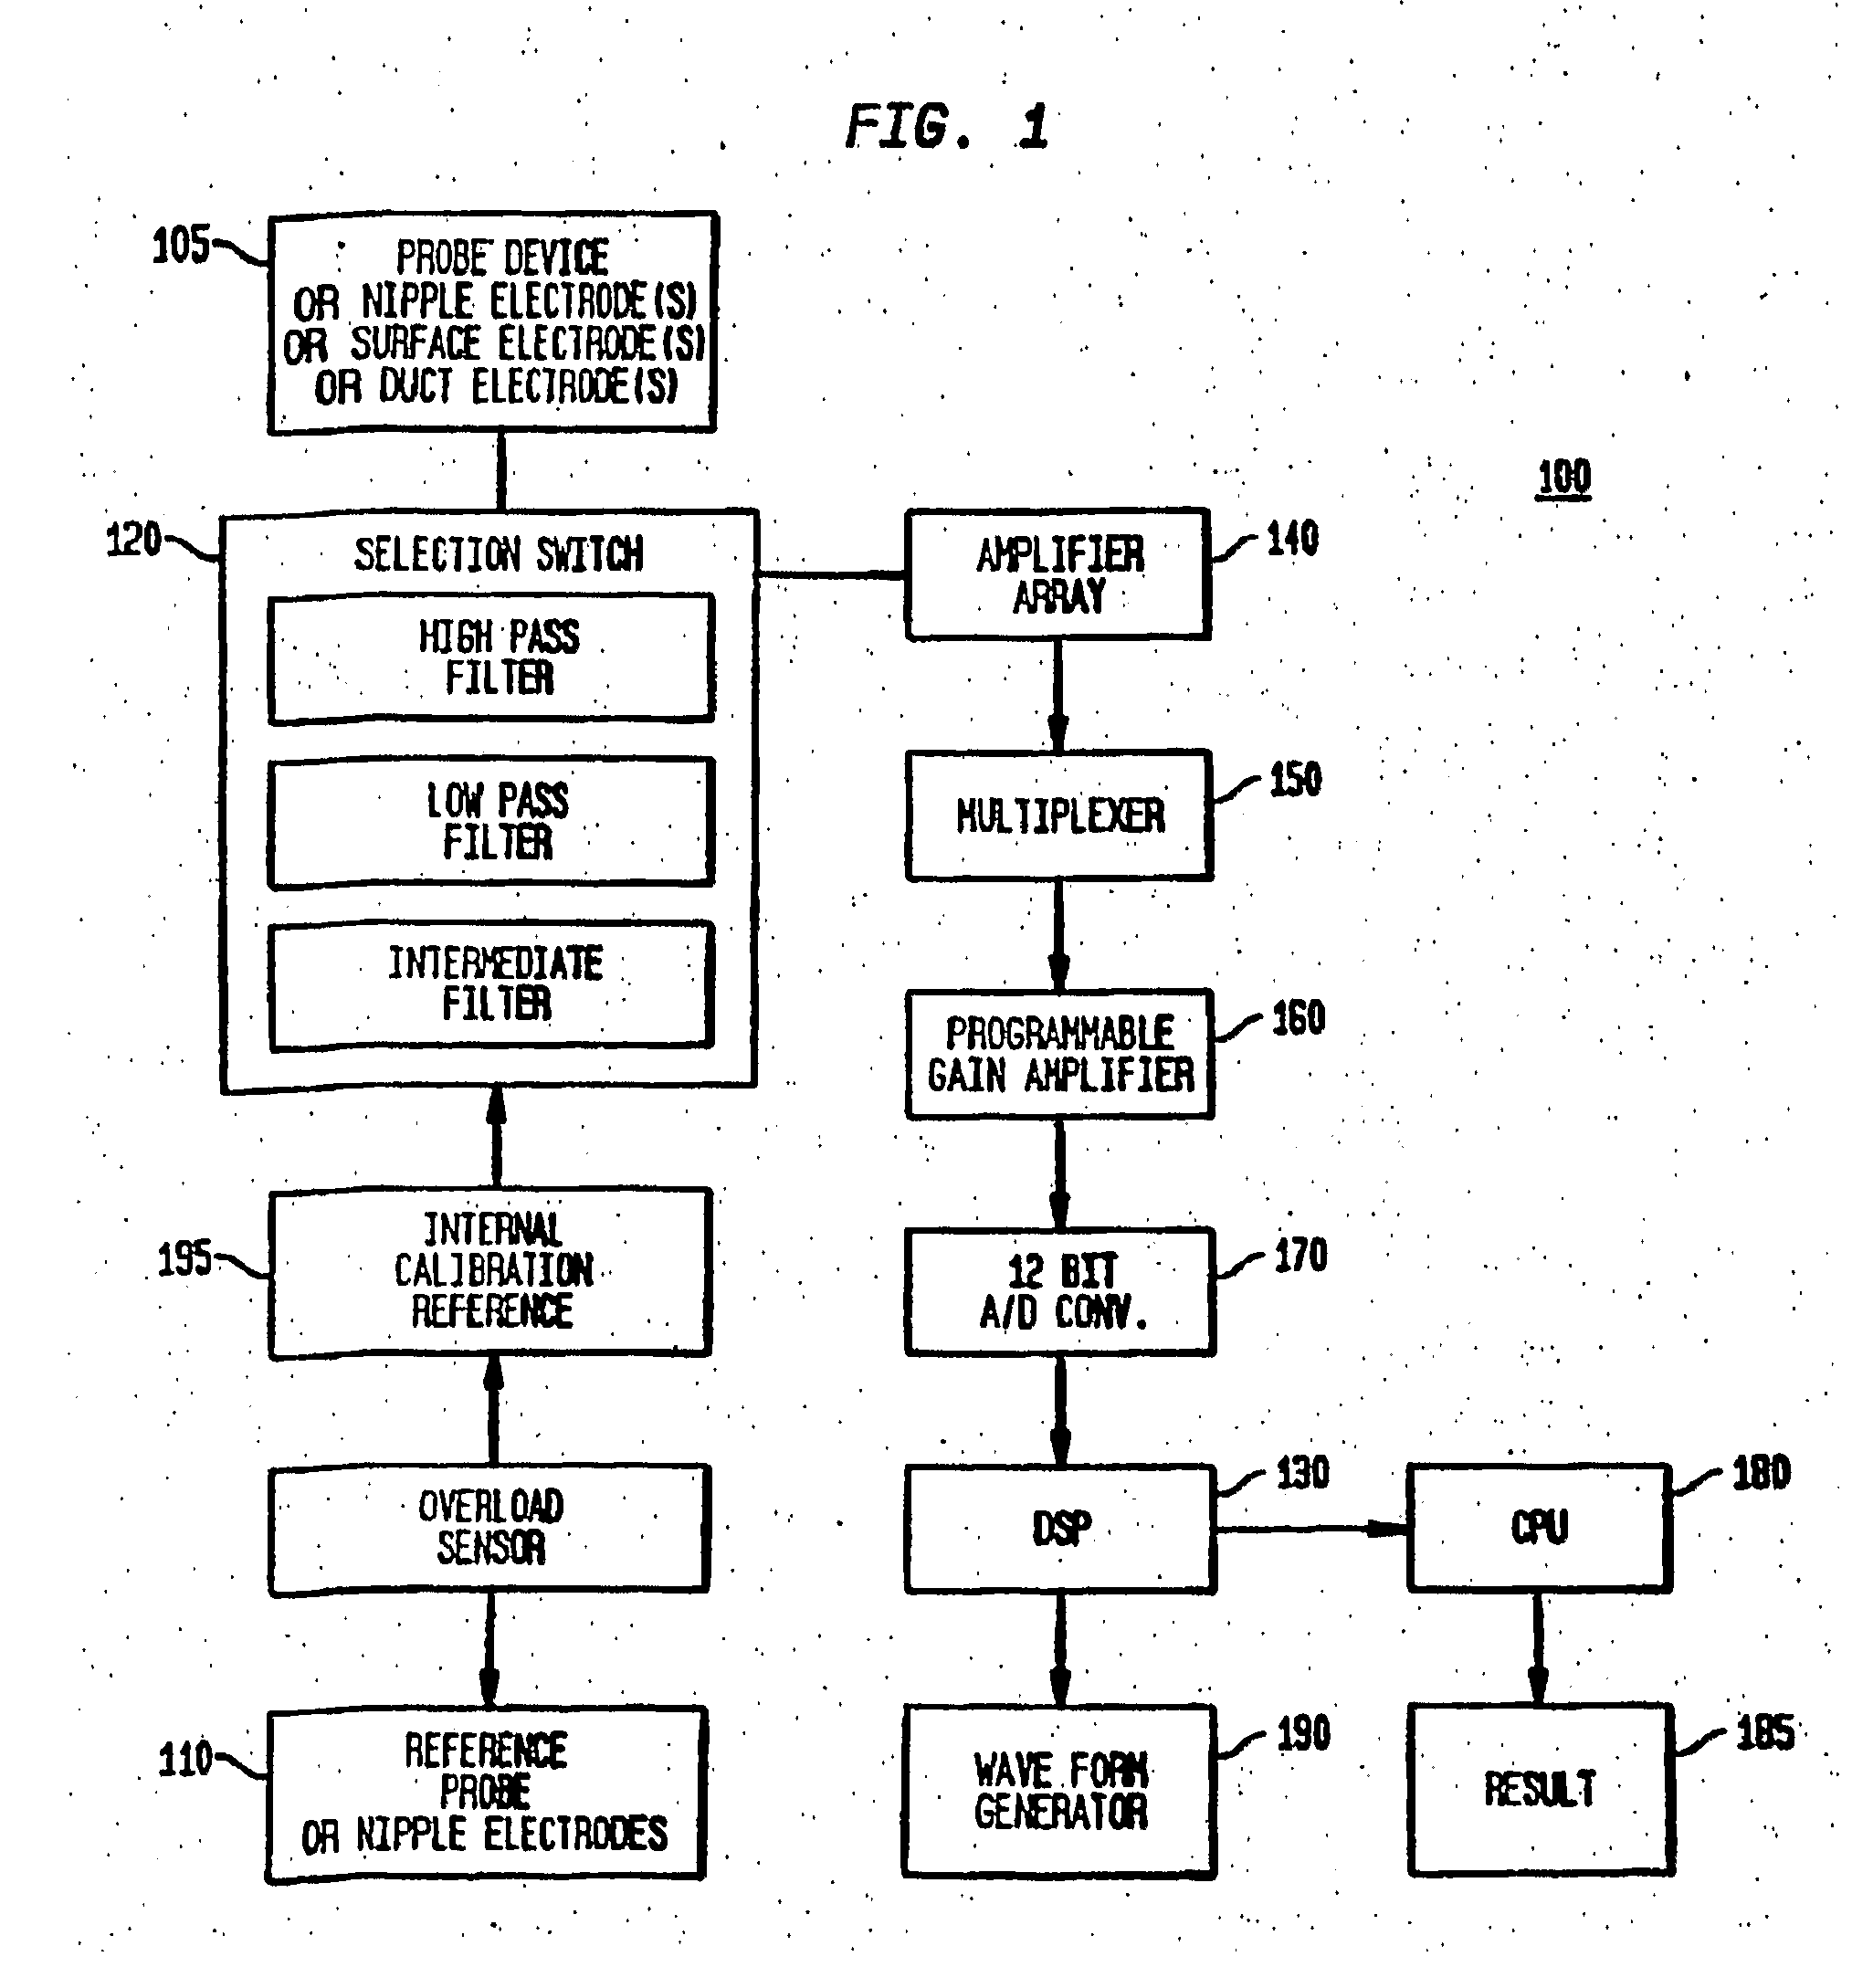 Method and System for Detecting Electrophysiological Changes in Pre-Cancerous and Cancerous Tissue and Epithelium